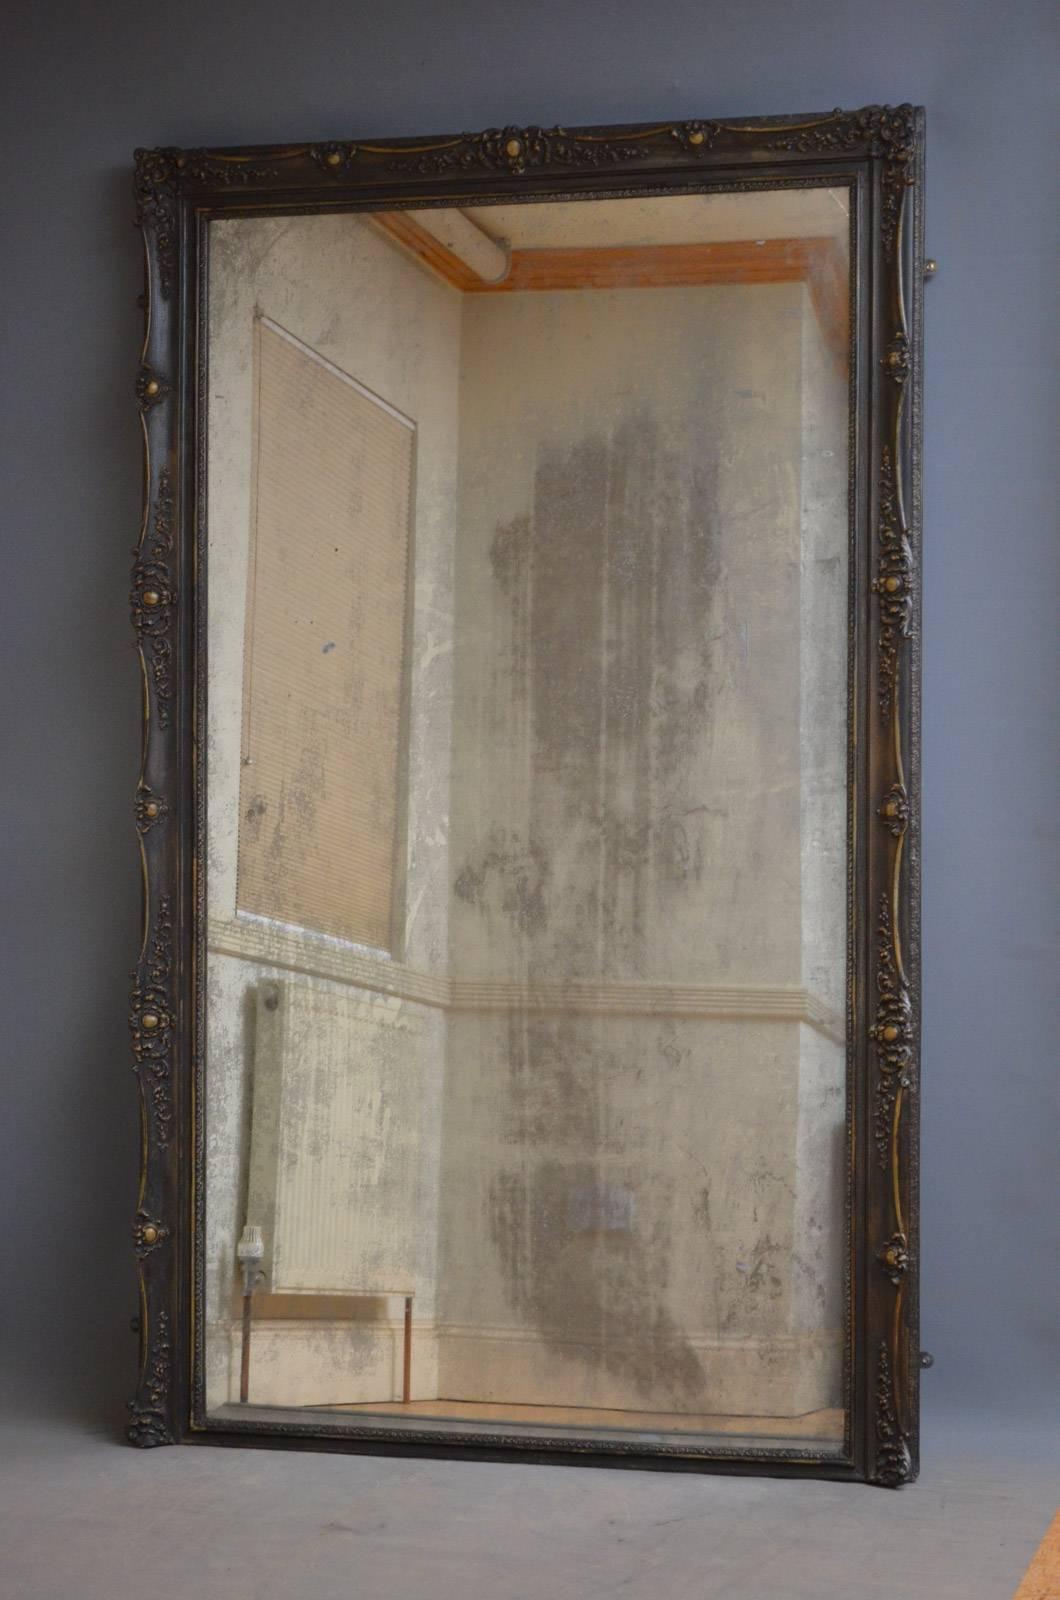 Sn4324 large late 19th century French floor standing mirror, having original mirror plate with excellent foxing and silvering throughout in finely carved frame. The glass has a small crack to top right corner but having aged so beautifully we